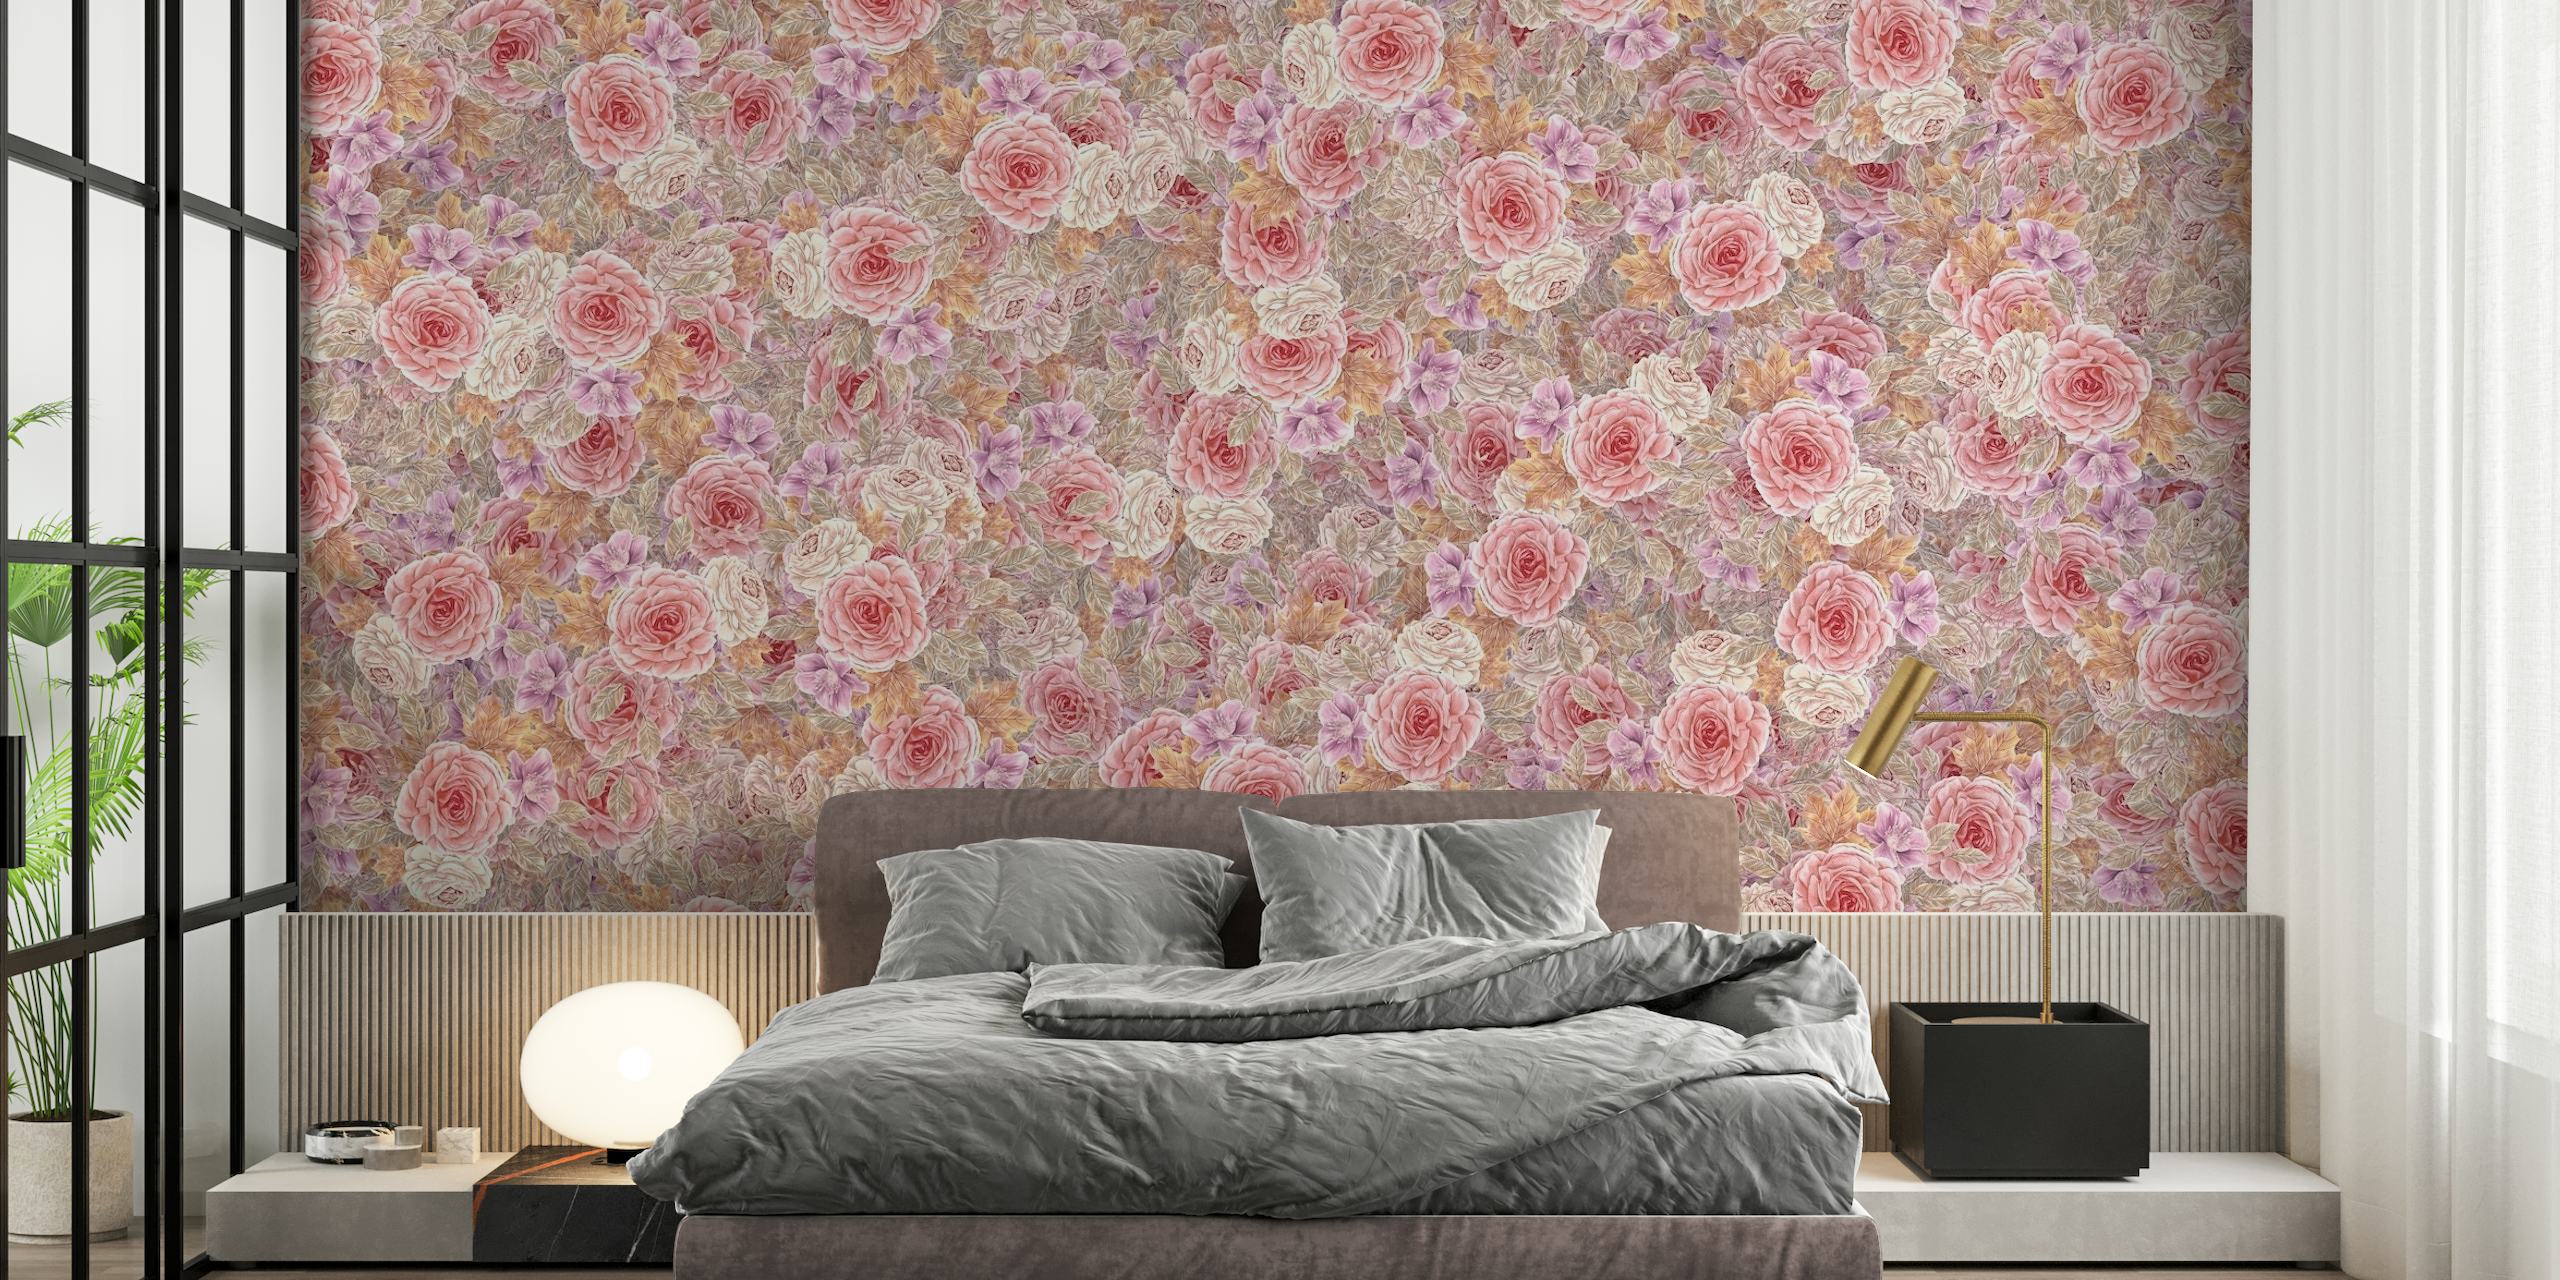 Watercolor tea roses in pink, orange, lilac, and taupe on a wall mural